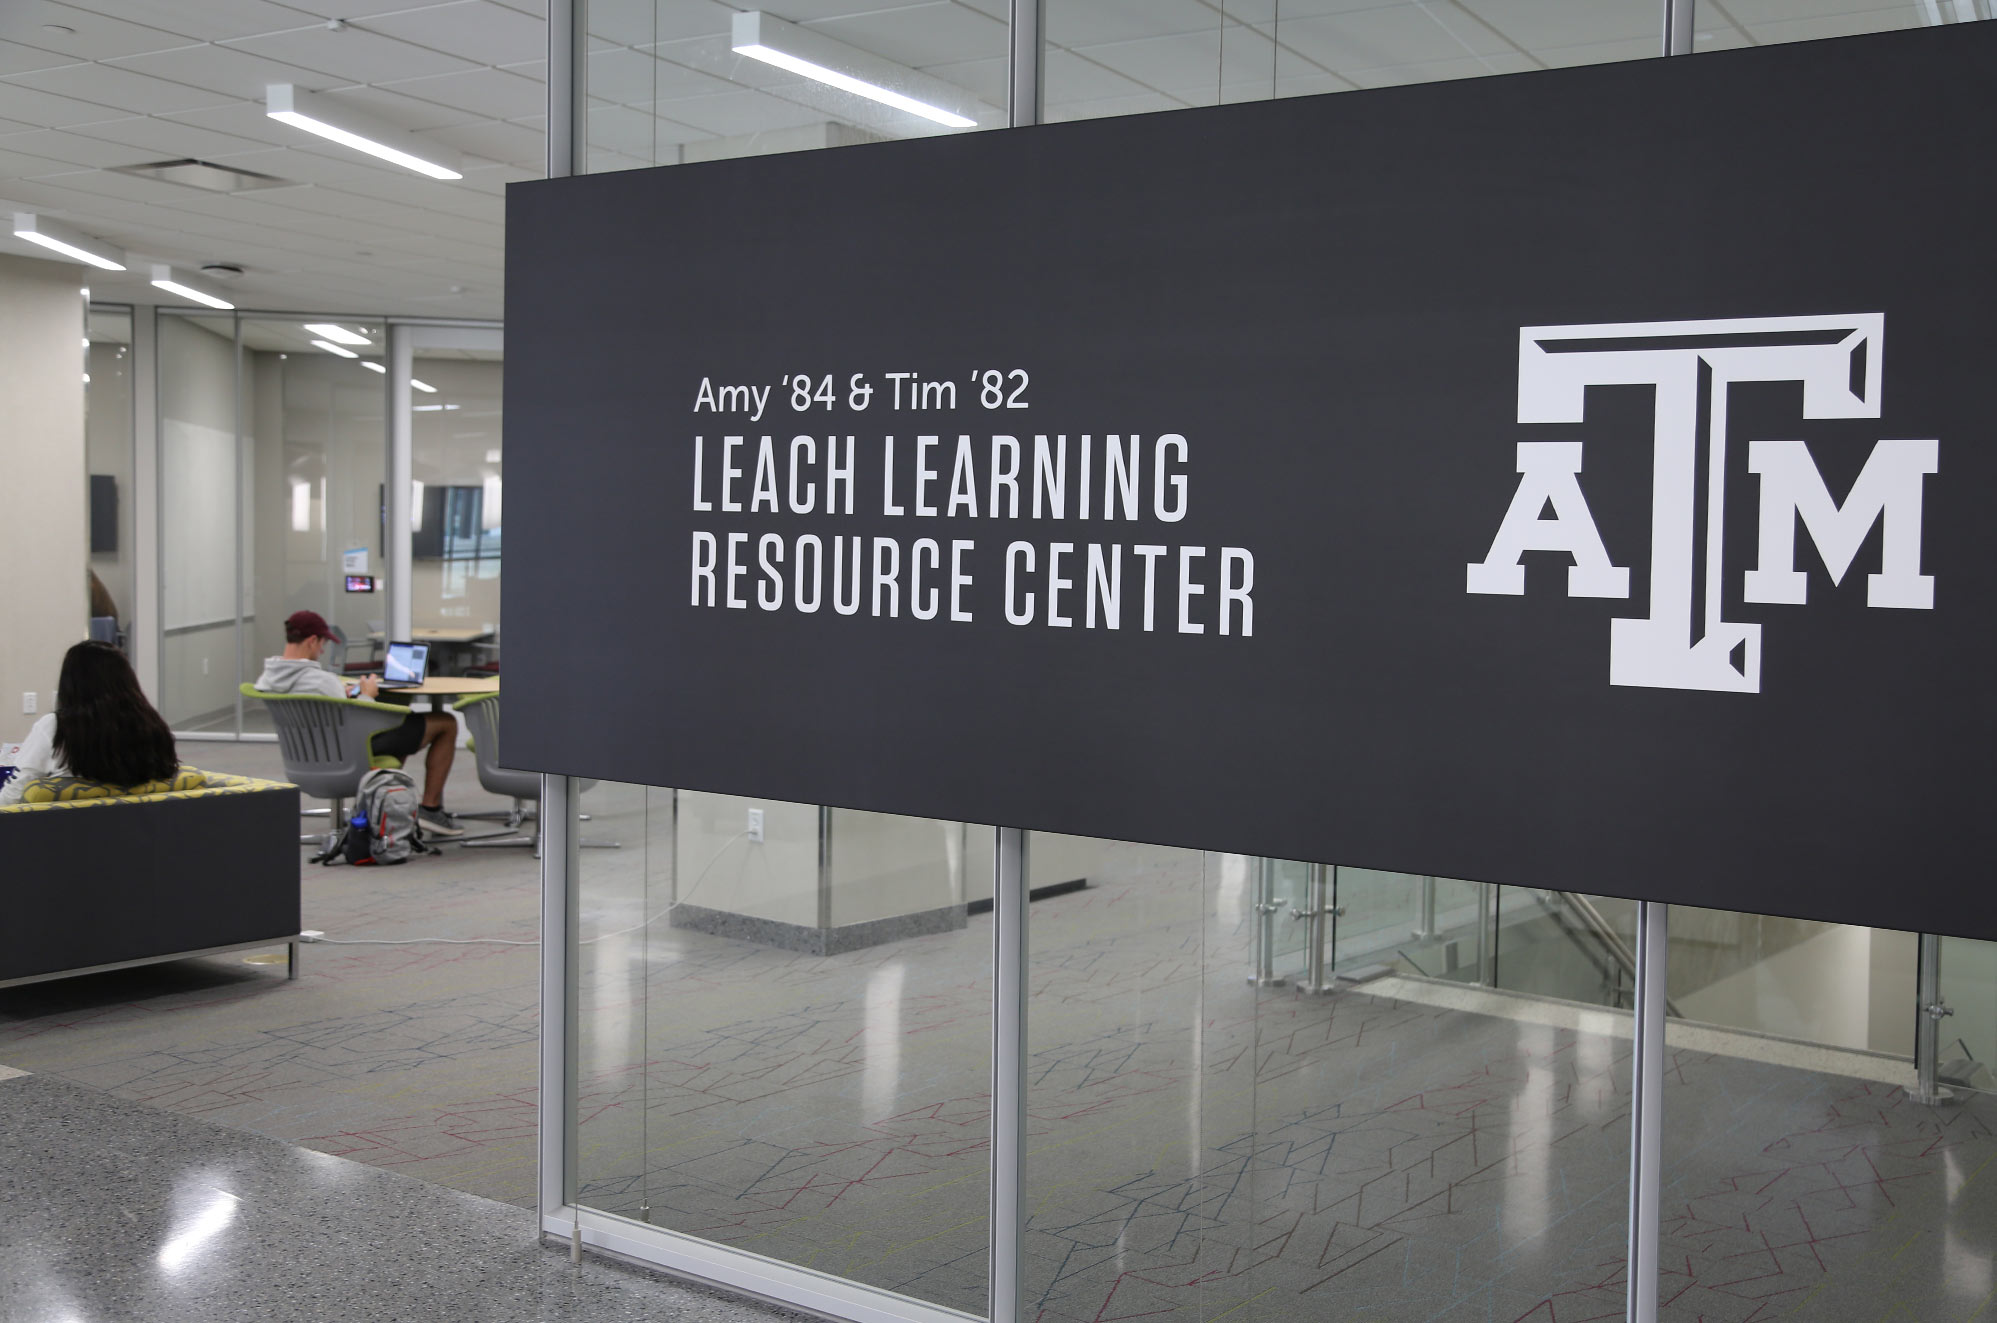 Leach Learning Resource Center entrance